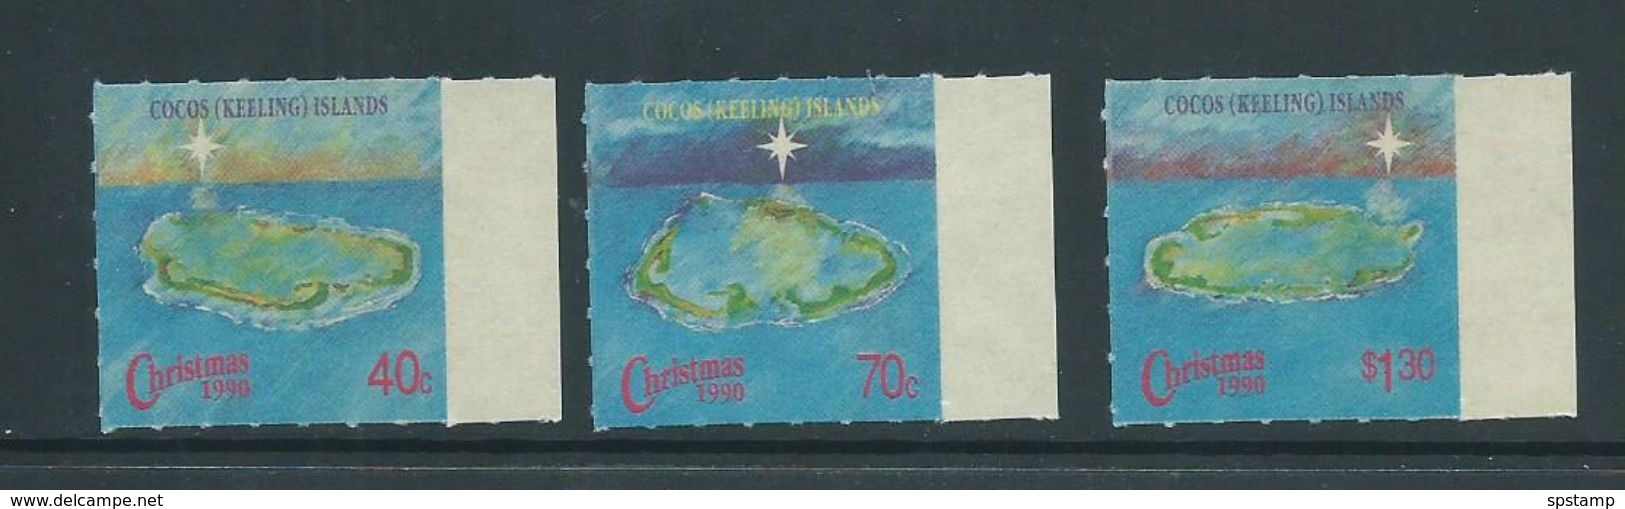 Cocos Keeling Island 1990 Christmas Set Of 3 Rouletted As Issued MNH - Cocos (Keeling) Islands